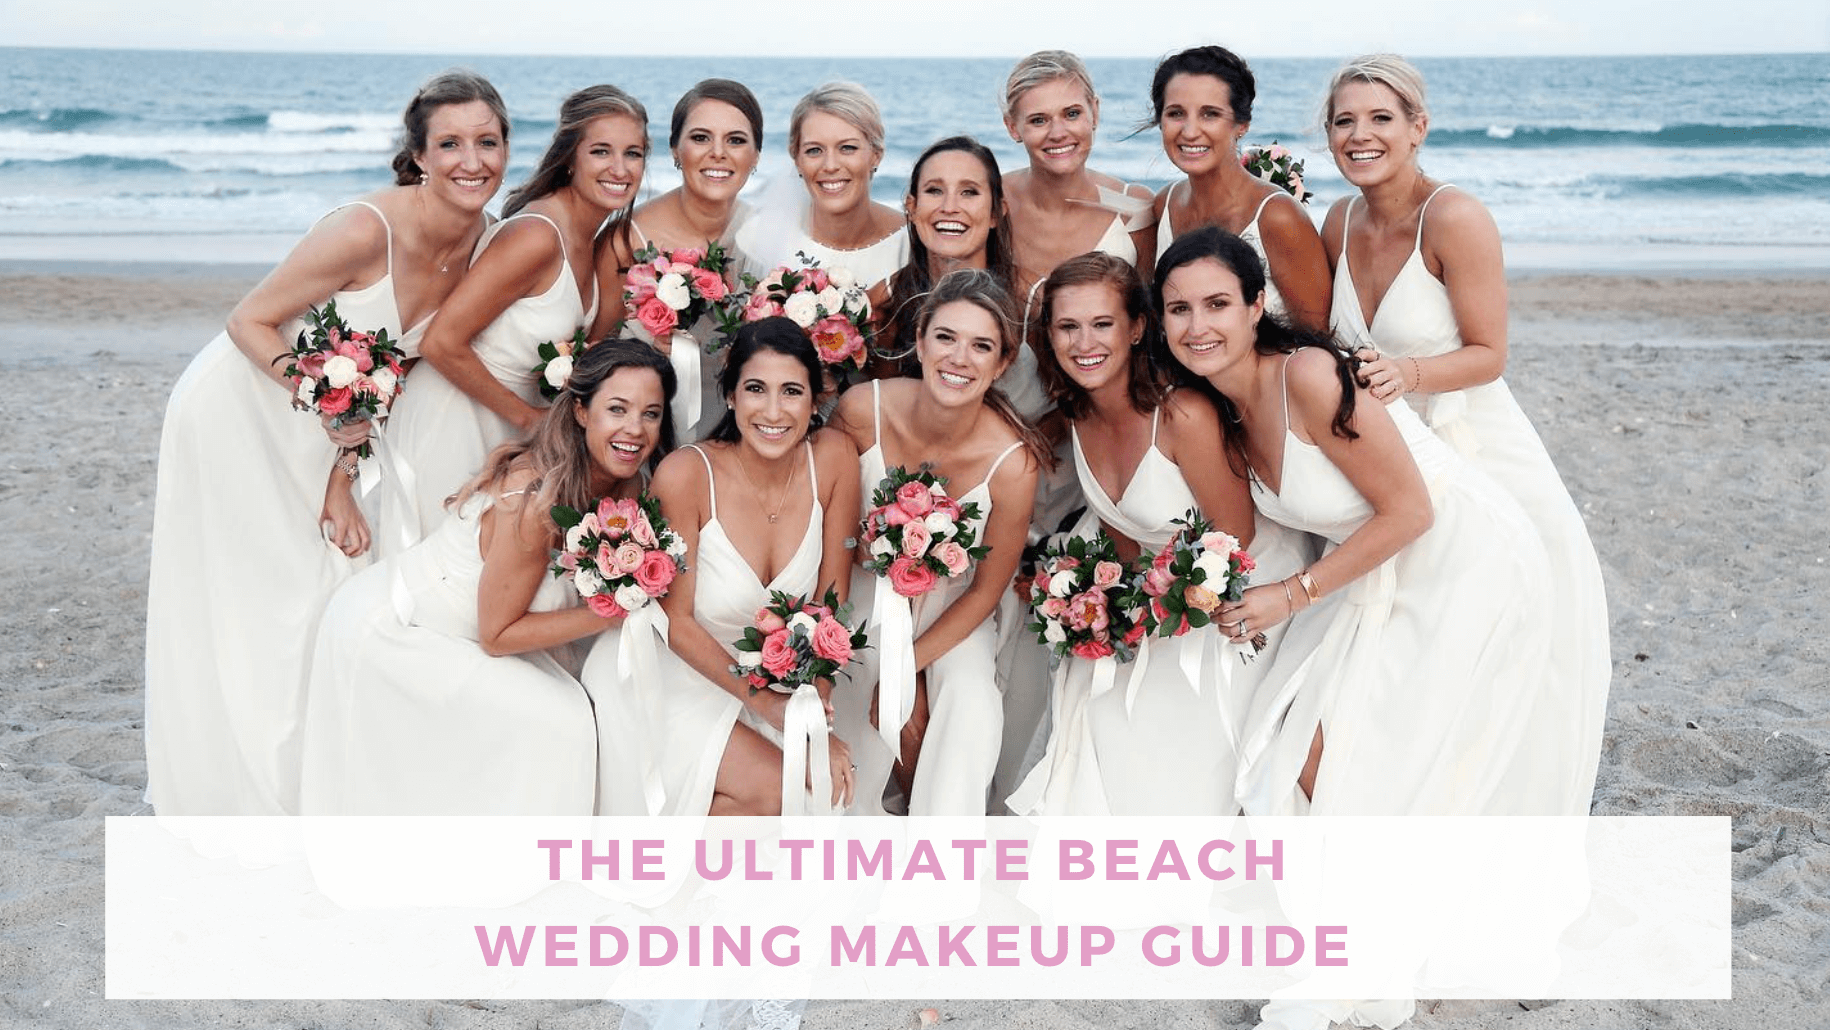 The Ultimate Beach Wedding Makeup Guide